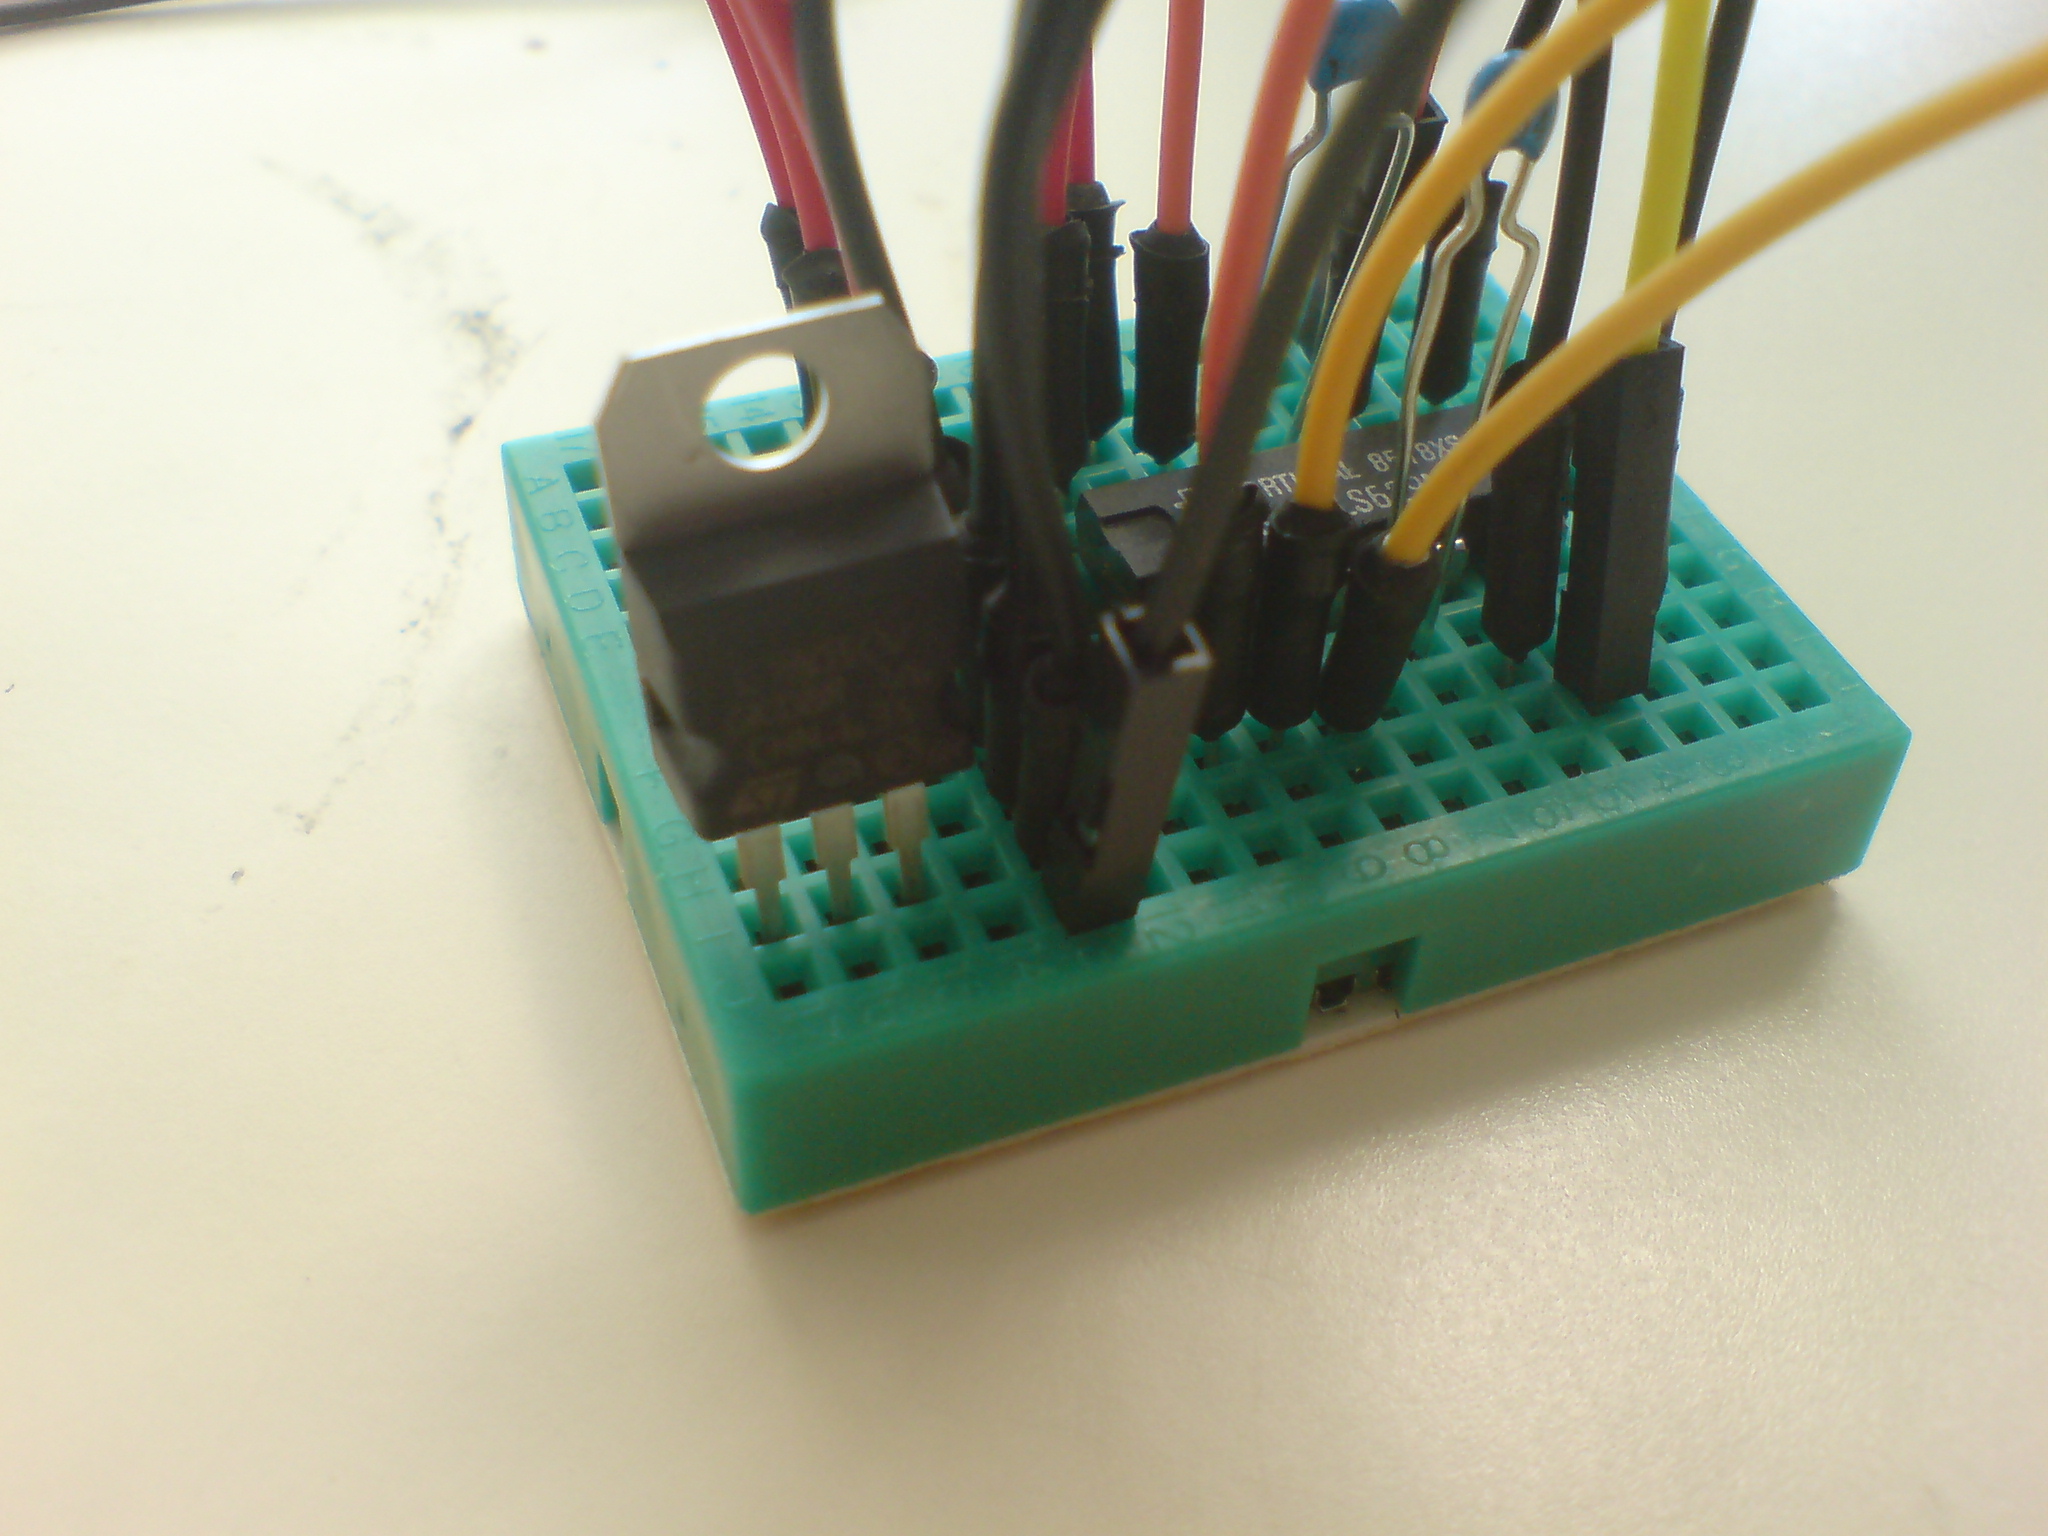 Attach regulator to breadboard - metal site away from yourself